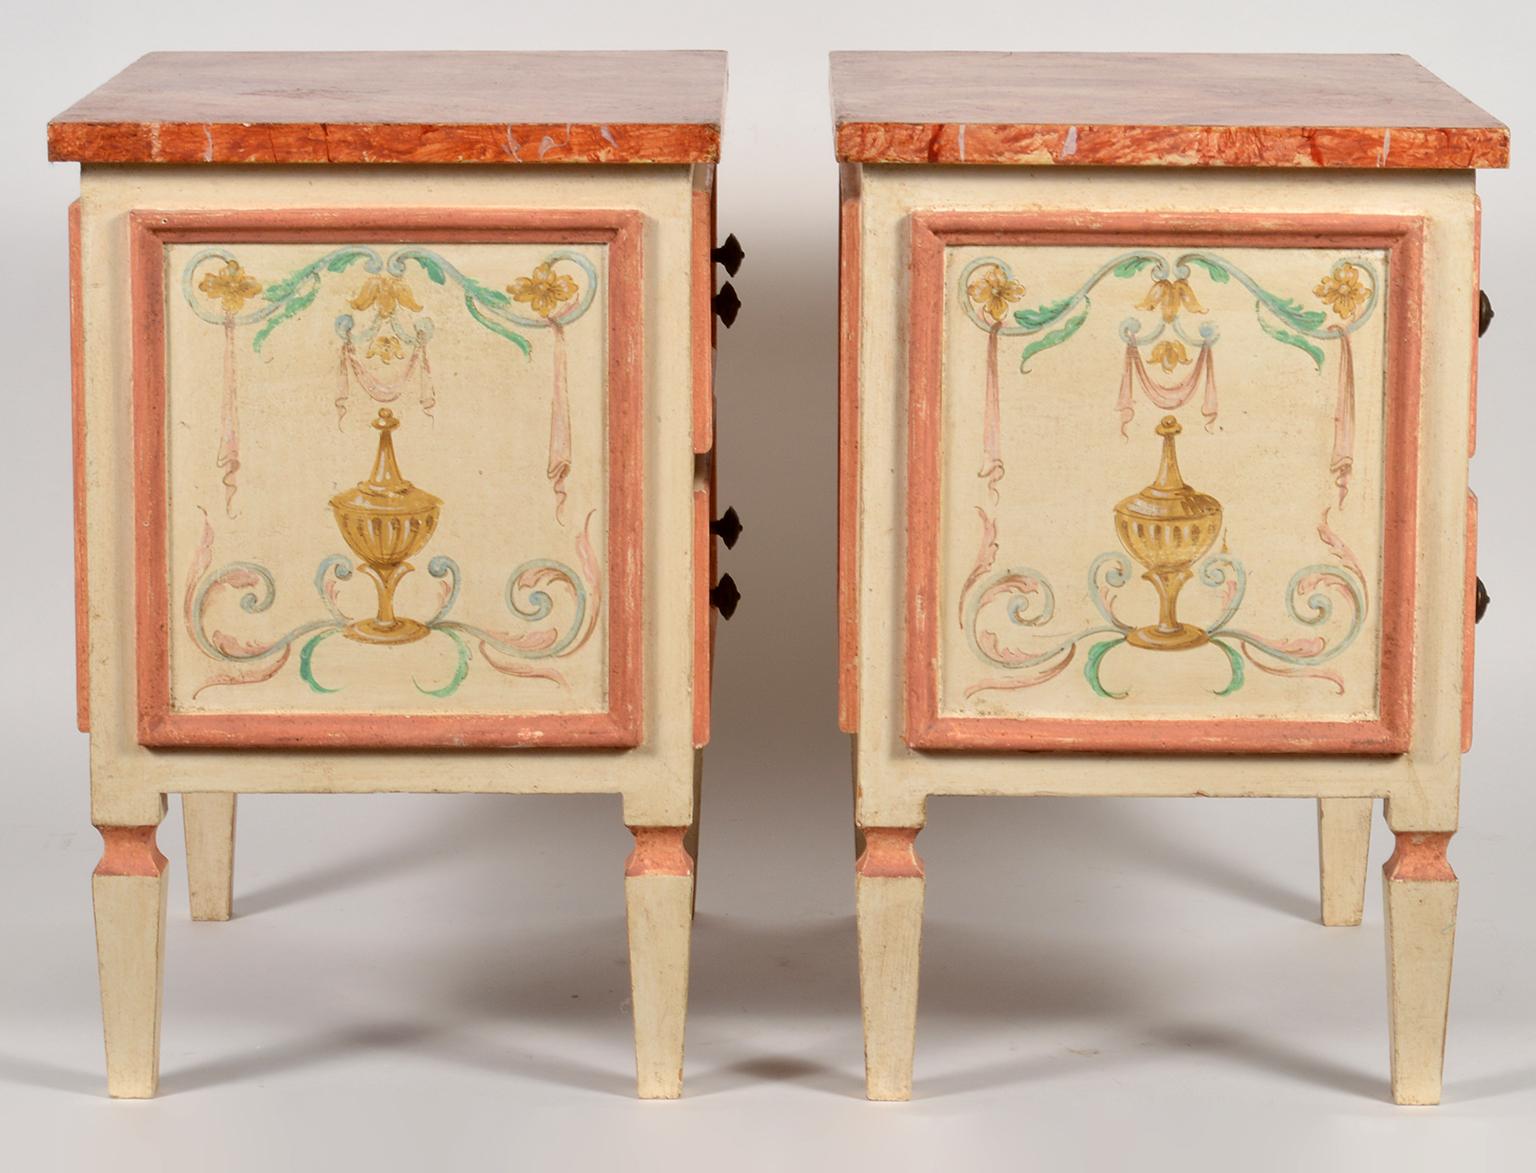 20th Century Pair of Italian Midcentury Painted and Marbleised Petite Two-Drawer Commodes